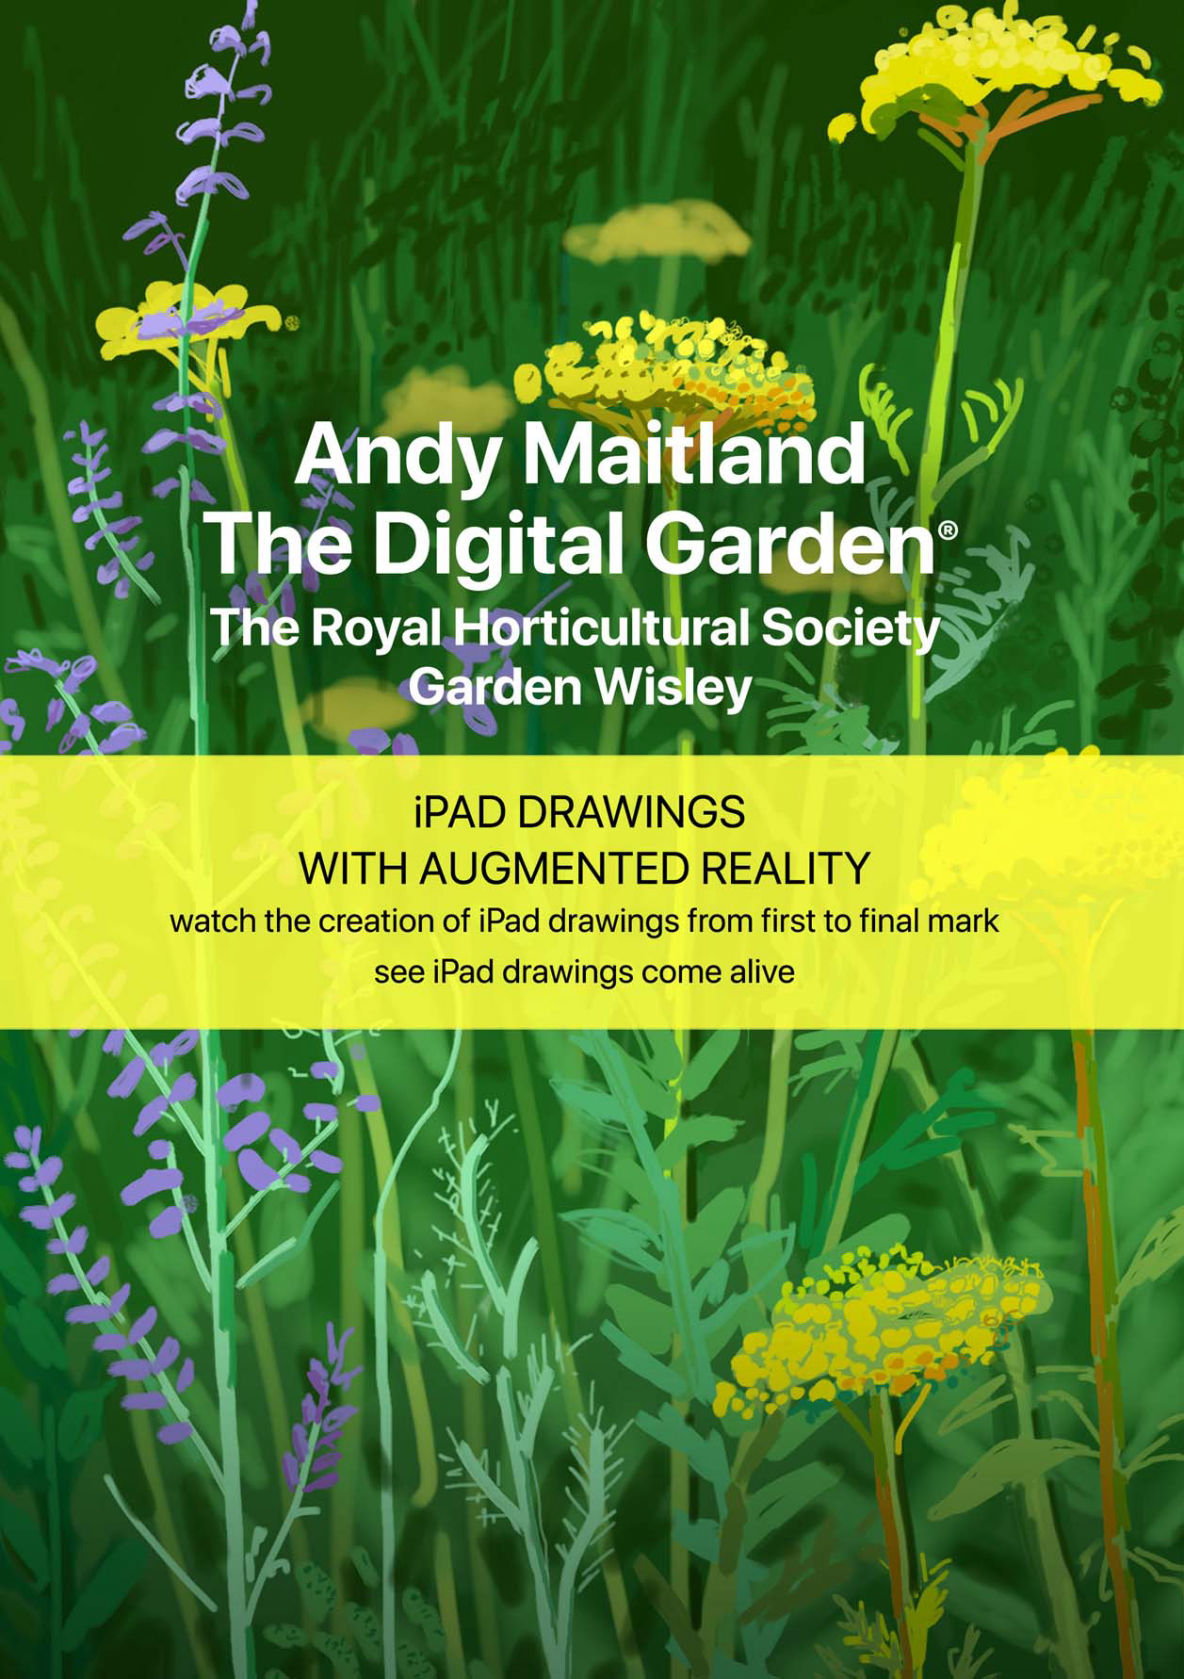 Publication, ‘Andy Maitland, The Digital Garden® 2018, iPad drawings with Augmented Reality at the Royal Horticultural Society’ book.